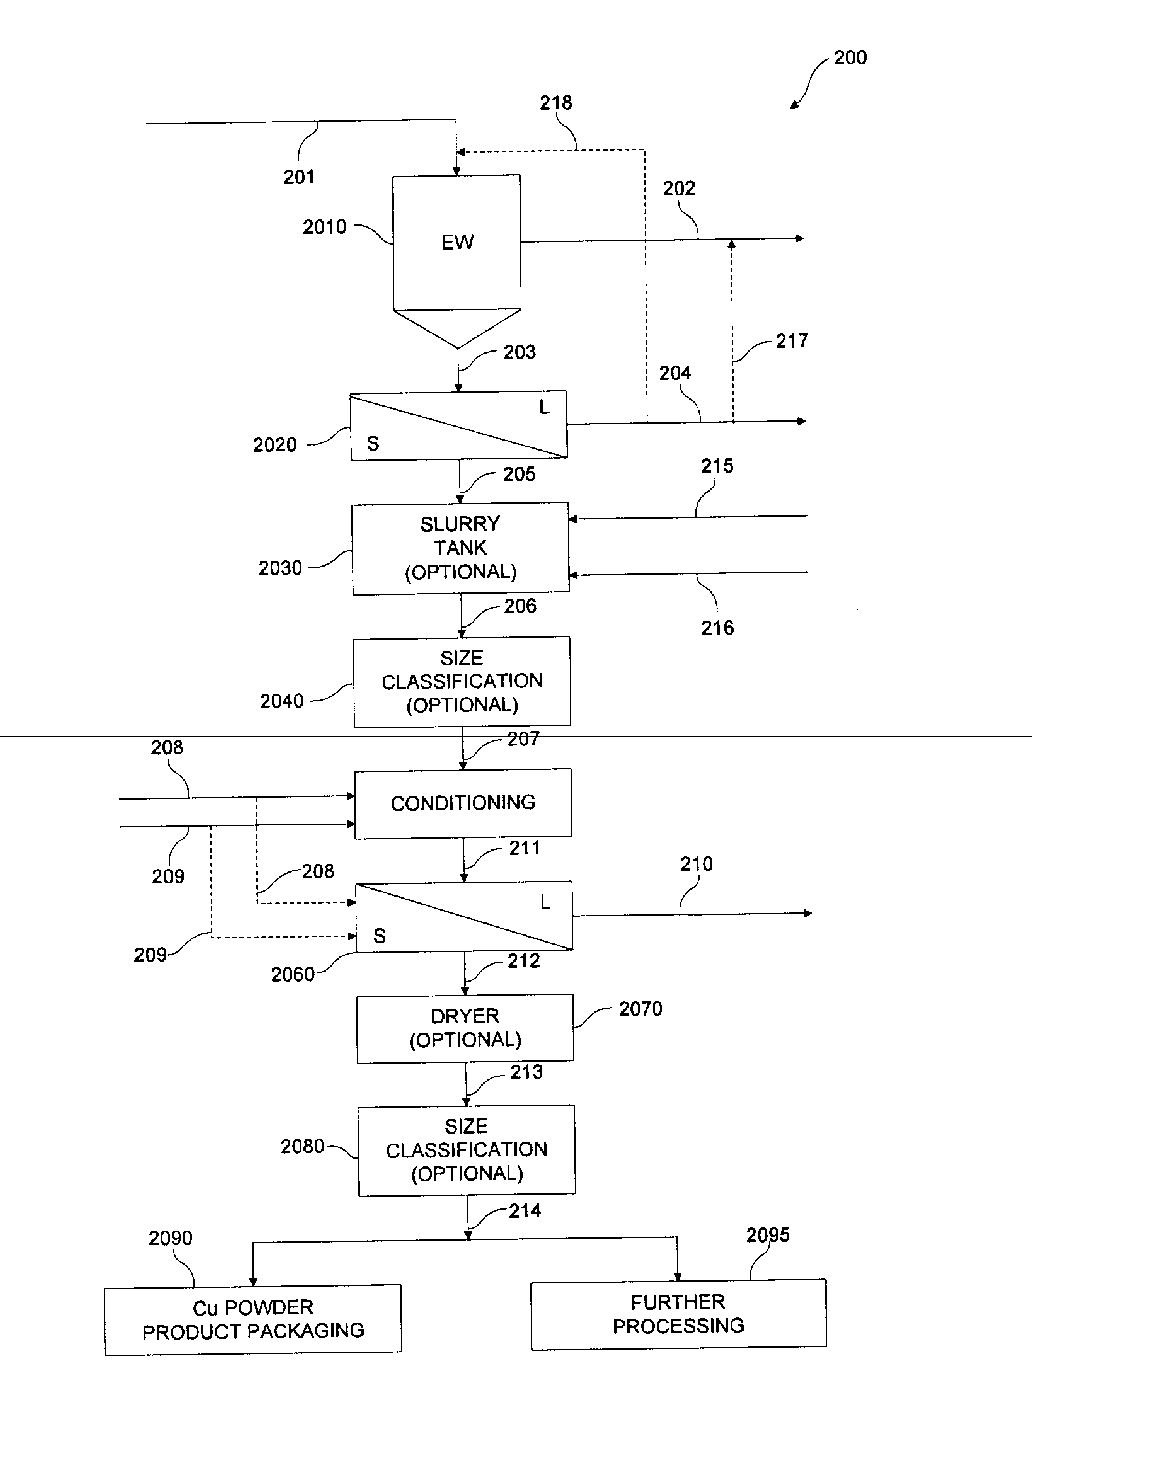 System and method for producing copper powder by electrowinning using the ferrous/ferric anode reaction